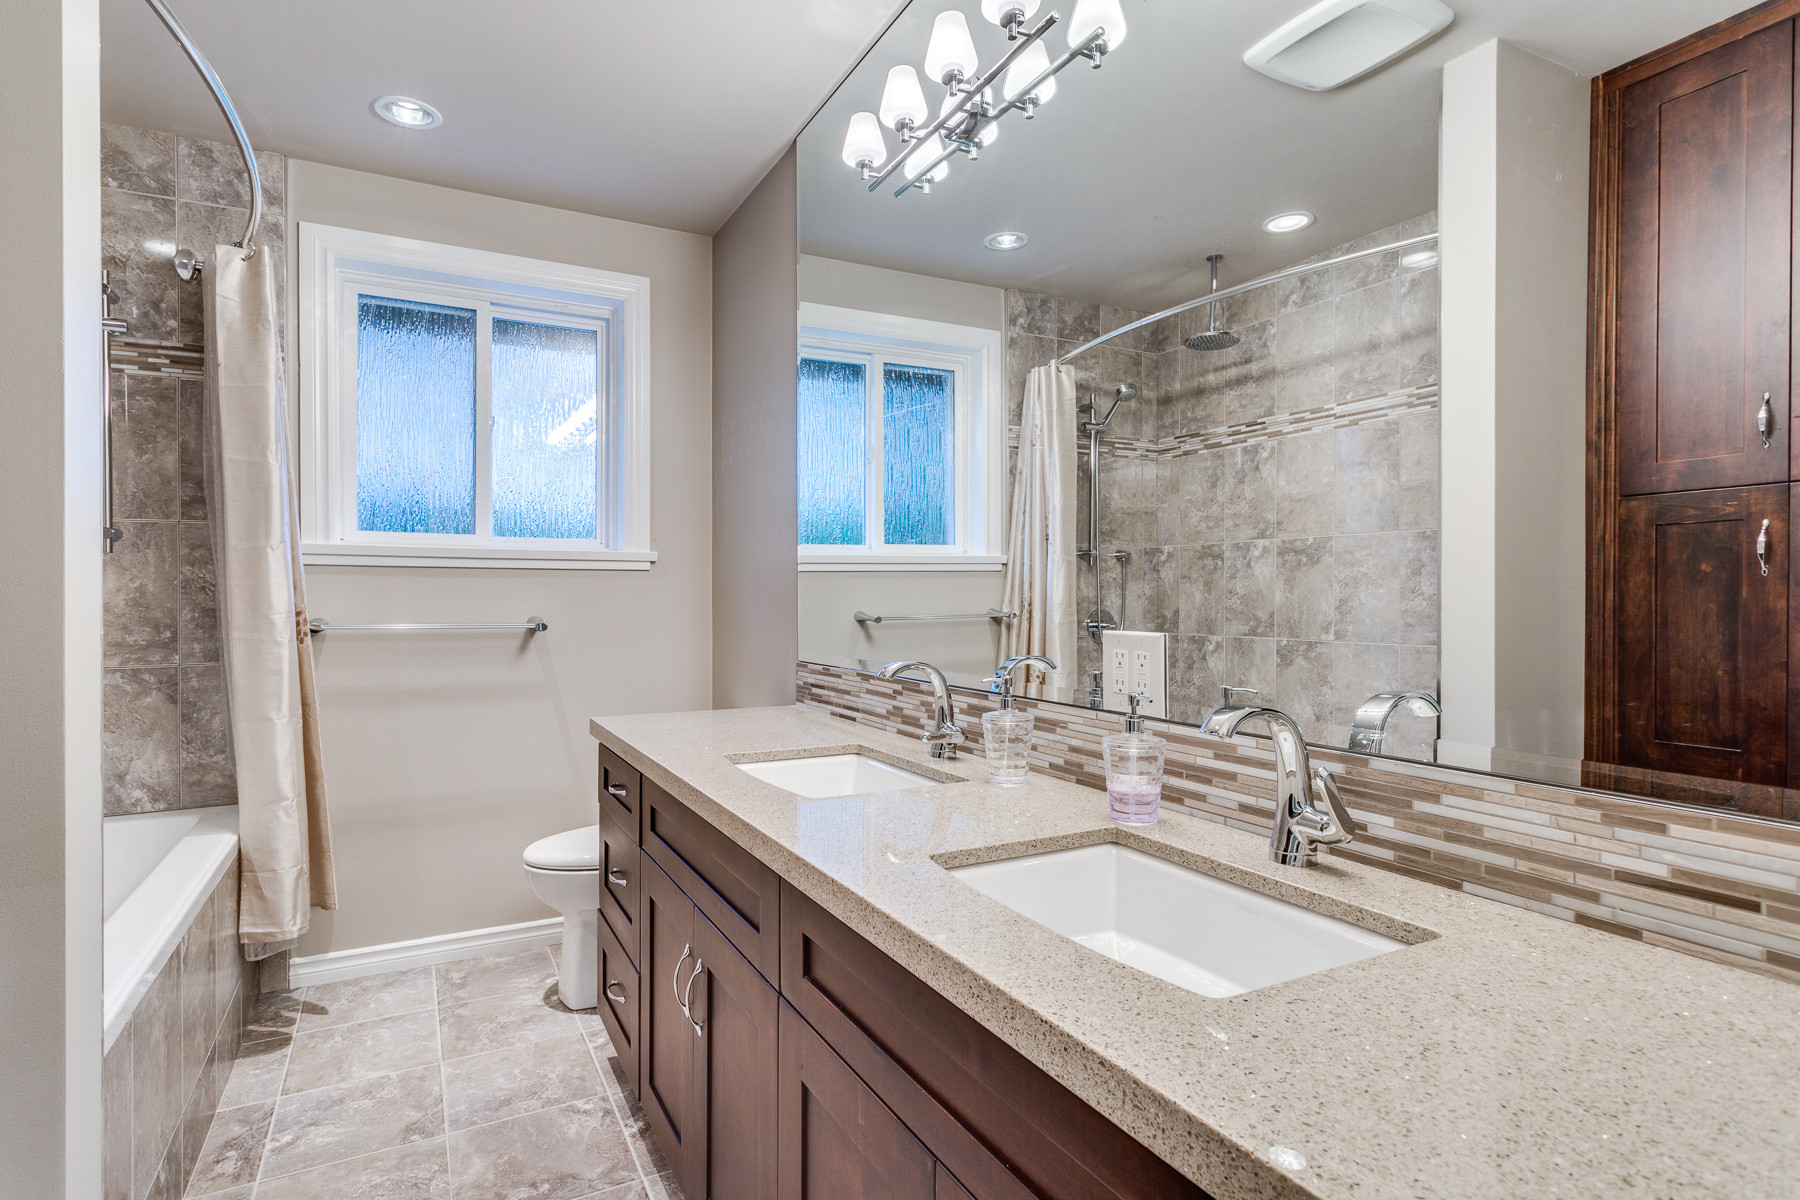 Cost Of Remodeling A Bathroom
 The Cost of a Vancouver Bathroom Renovation